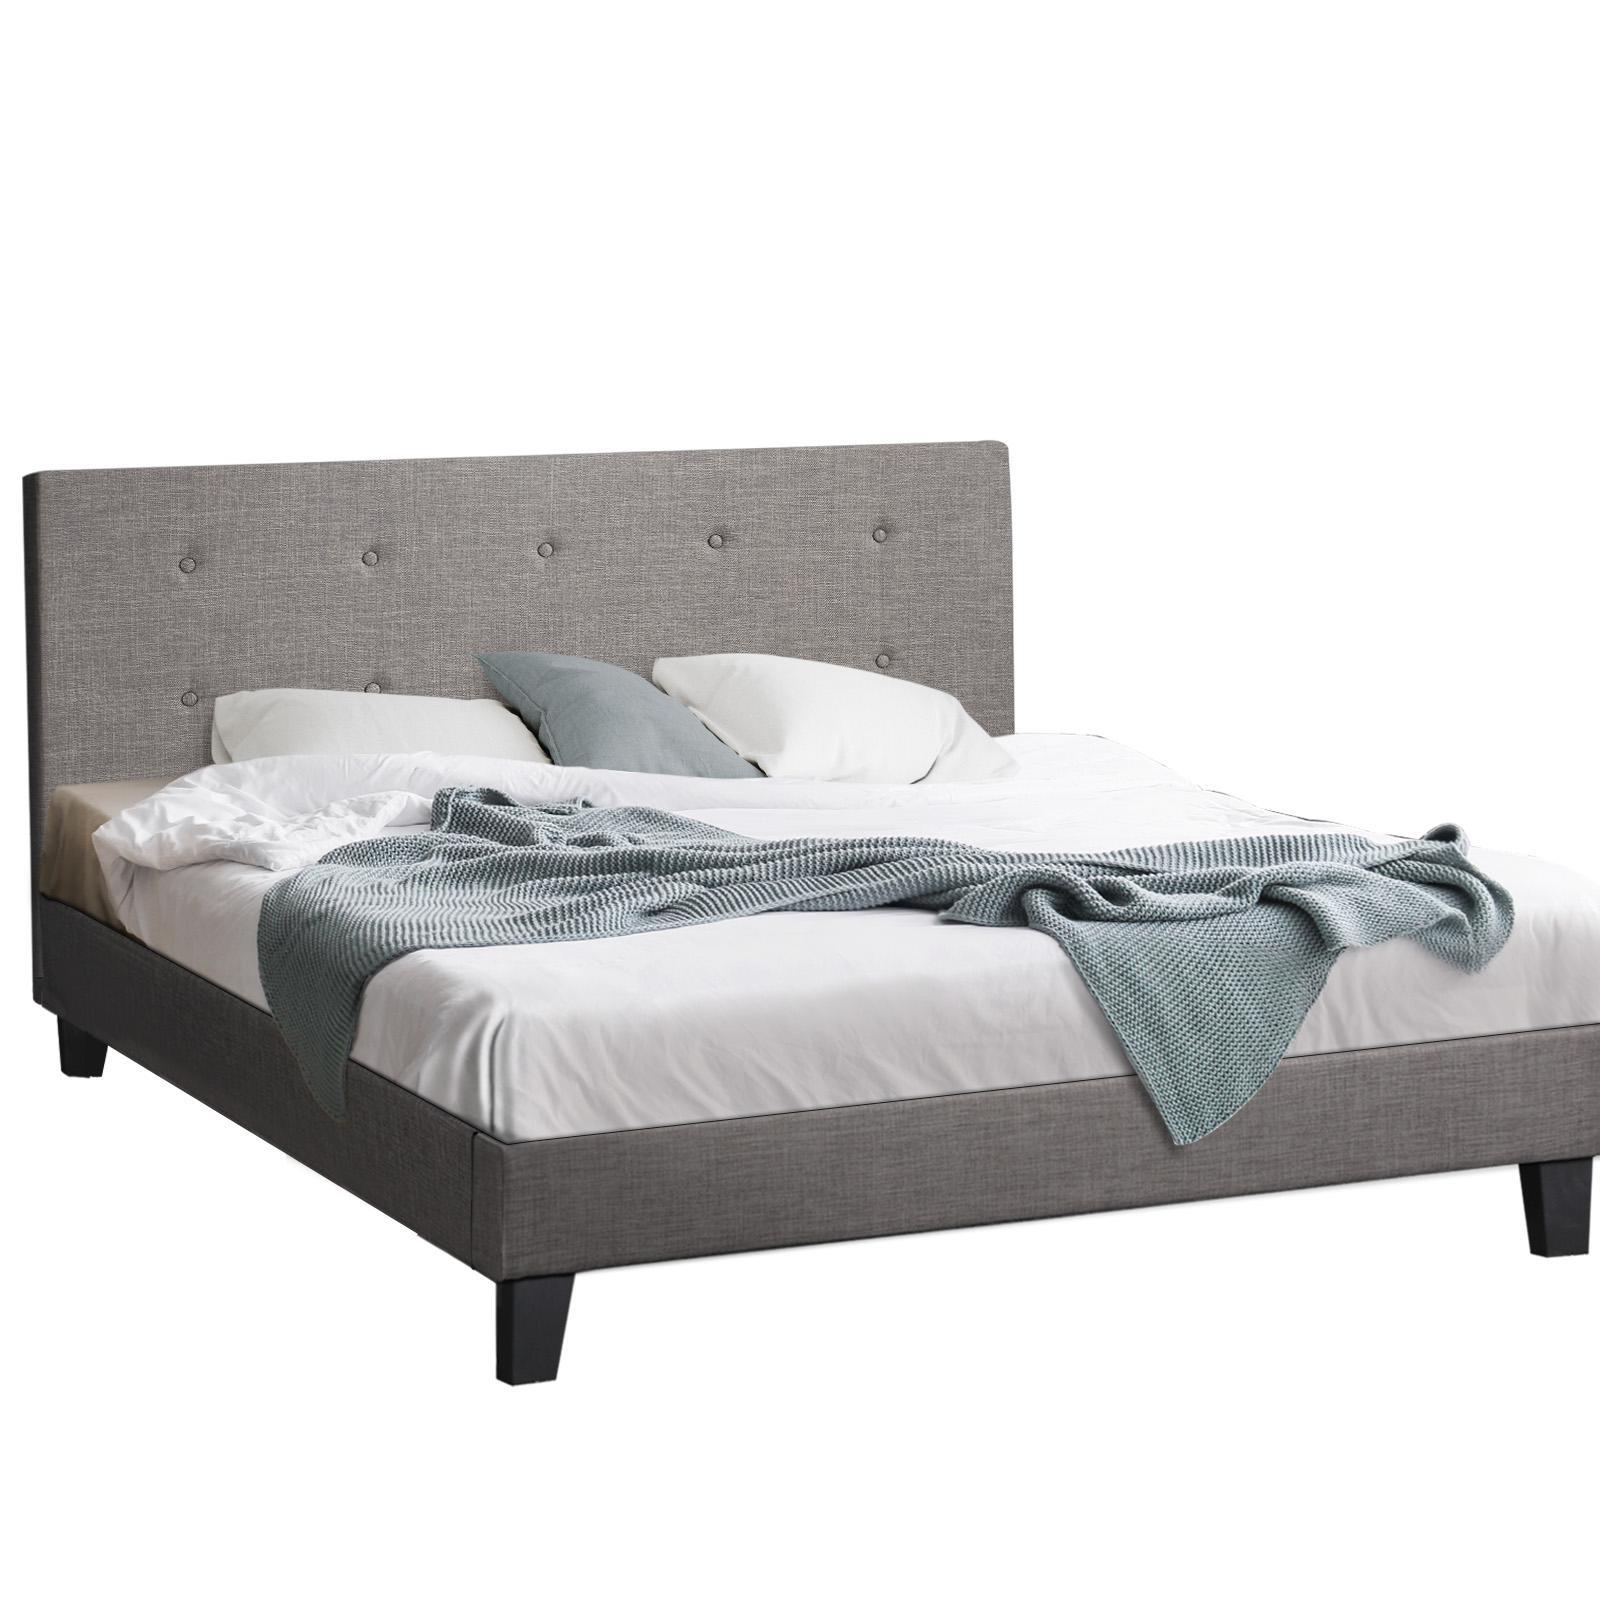 Oikiture Bed Frame Double Size Bed Platform Wooden Fabric Grey